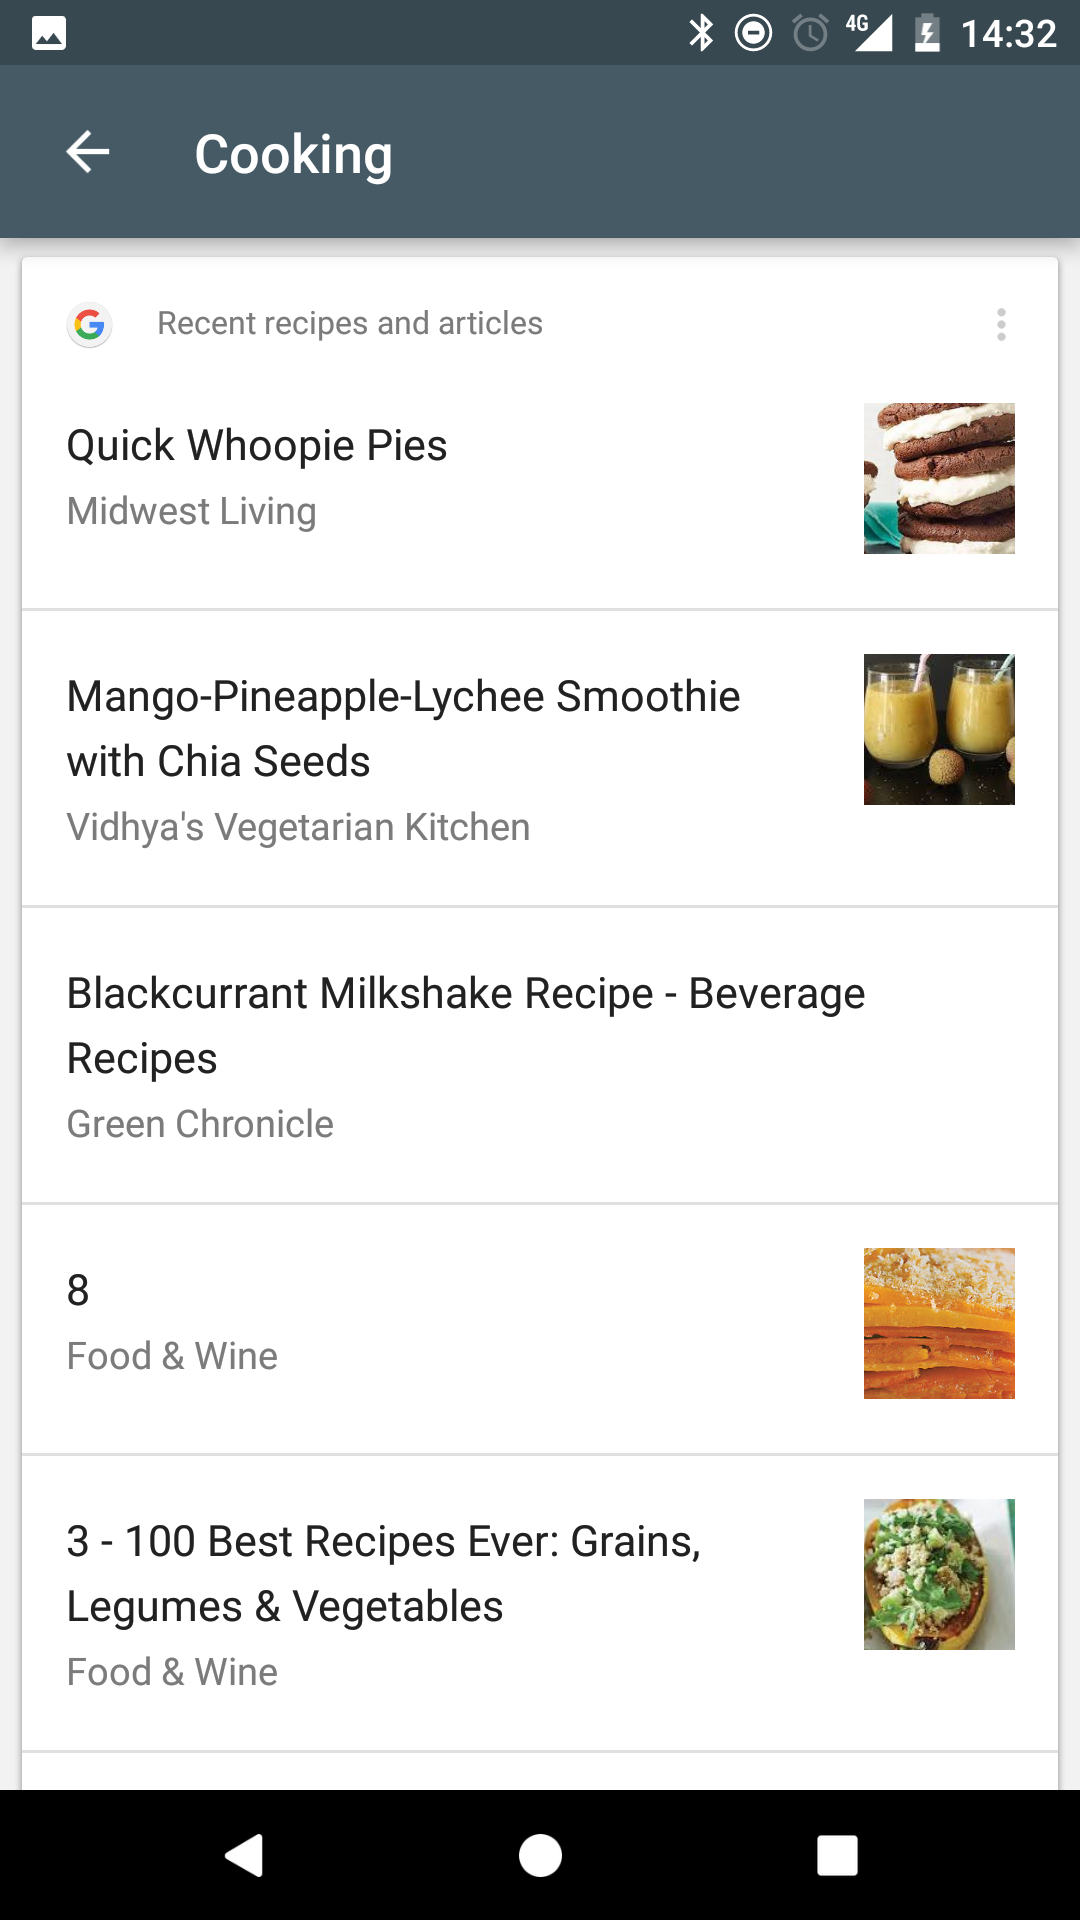 New Google Cooking Cards Spotted in Google Now